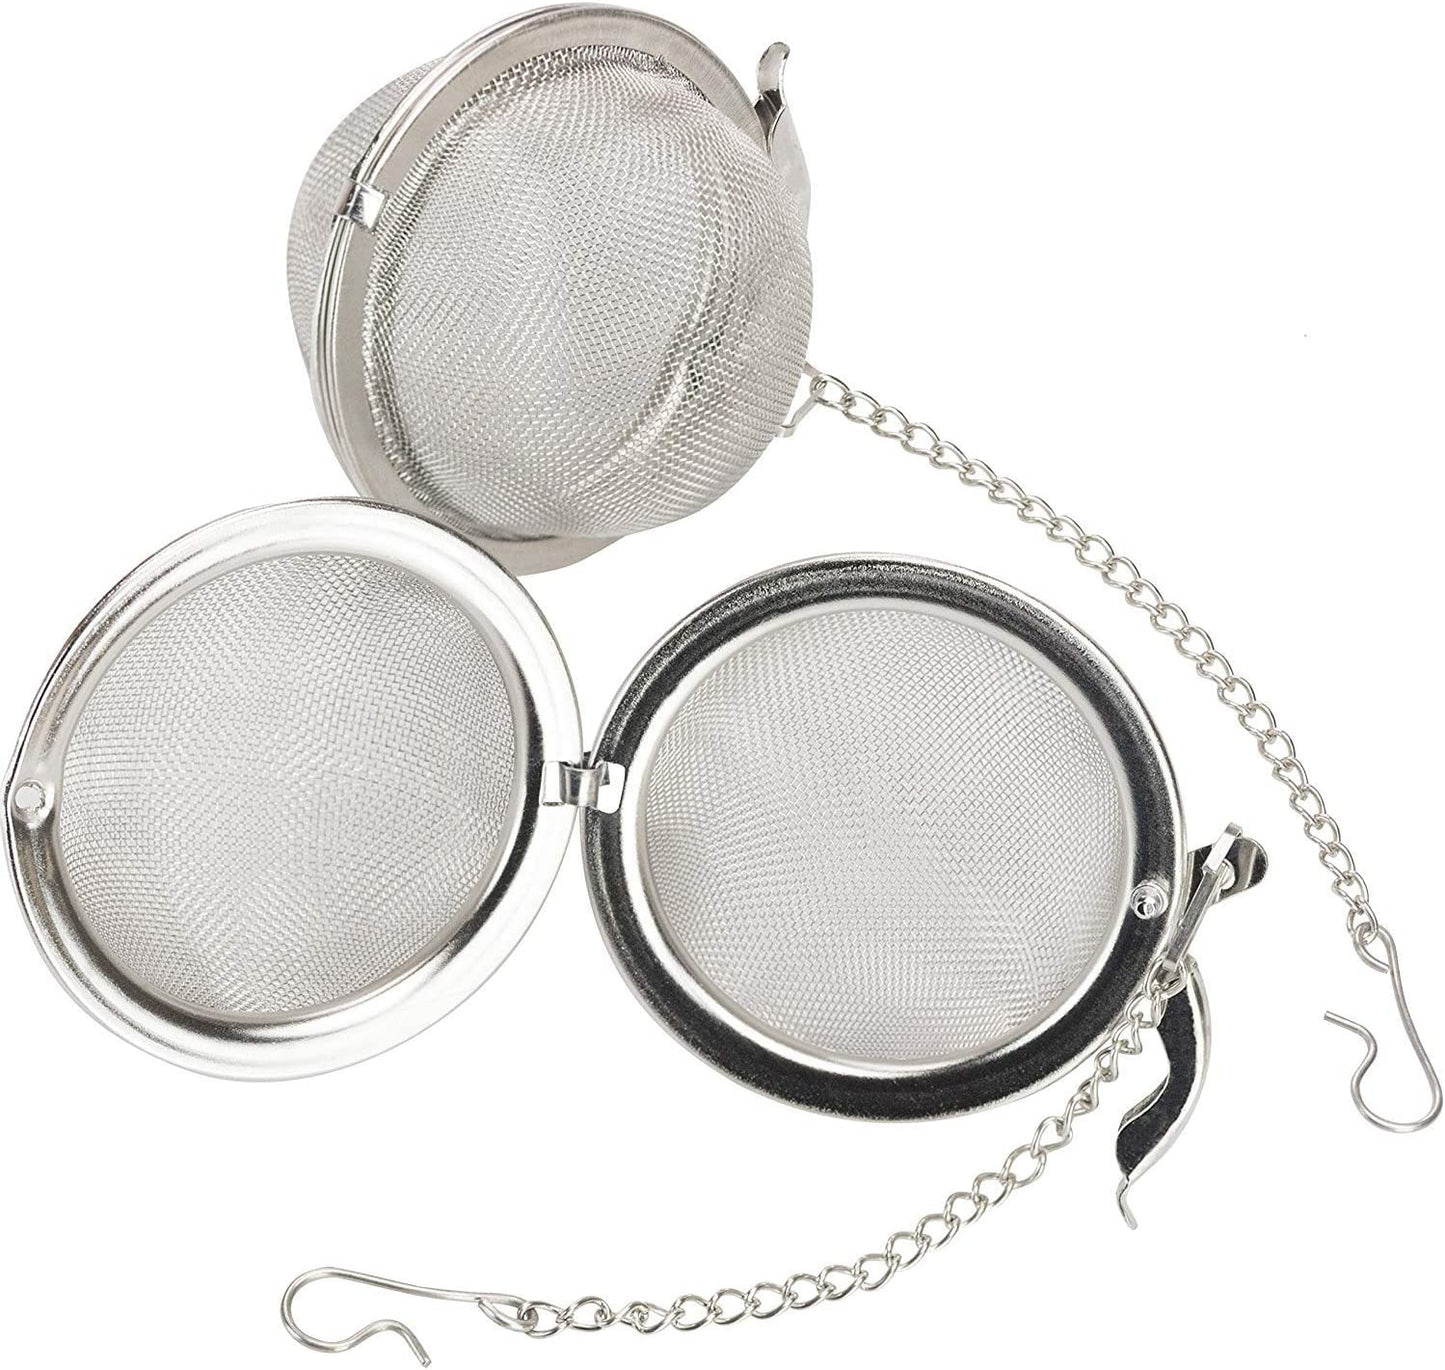 2 PC Stainless Steel Tea Ball / Infuser Strainer